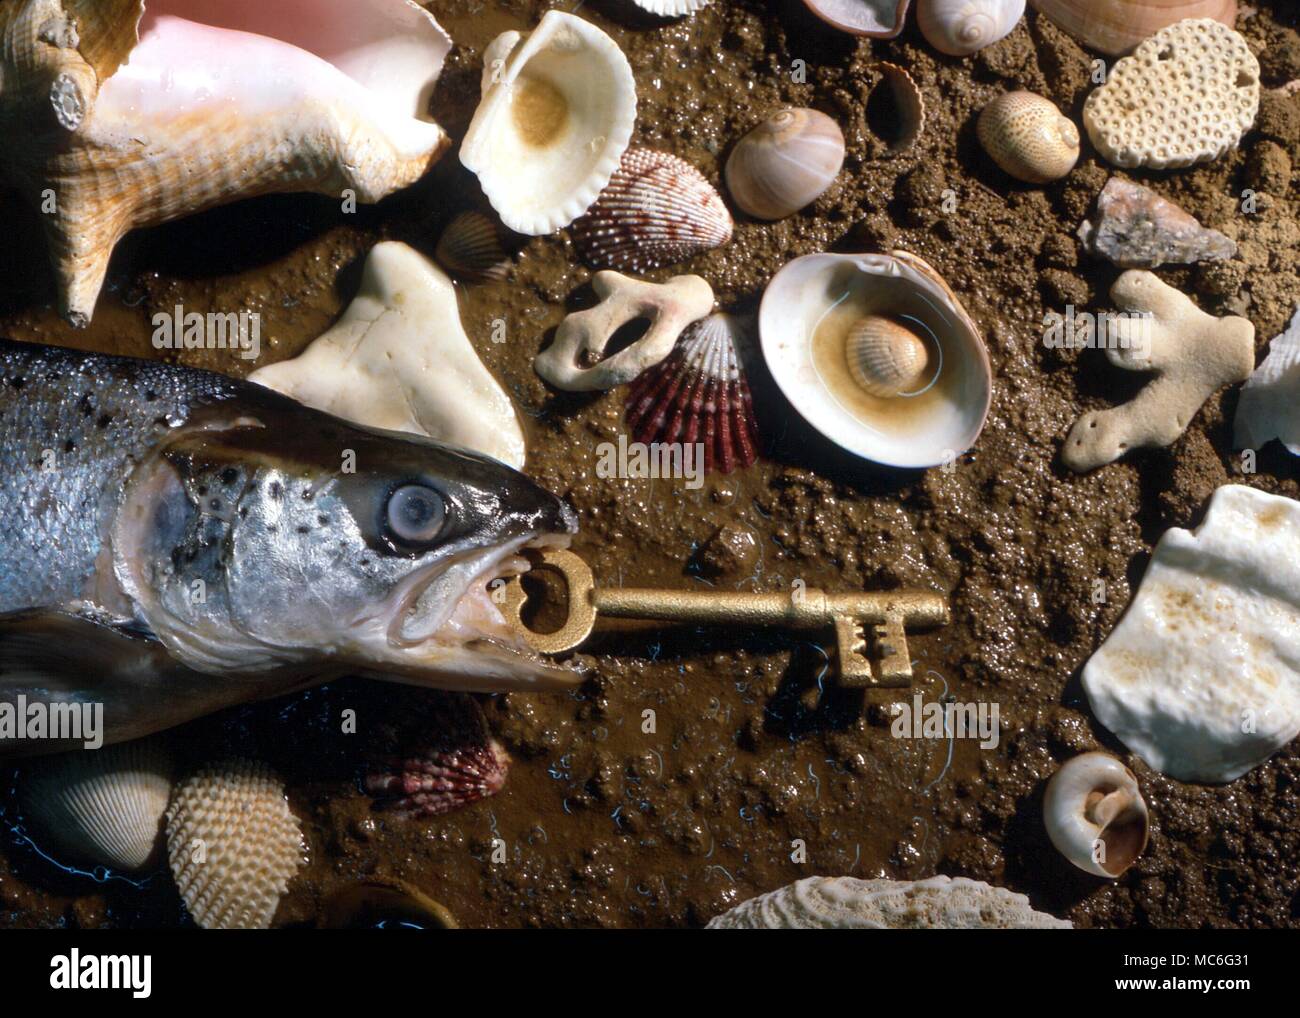 Fish (salmon) with golden key projecting from mouth - illustration to popular fairy tale about a magical fish. Stock Photo